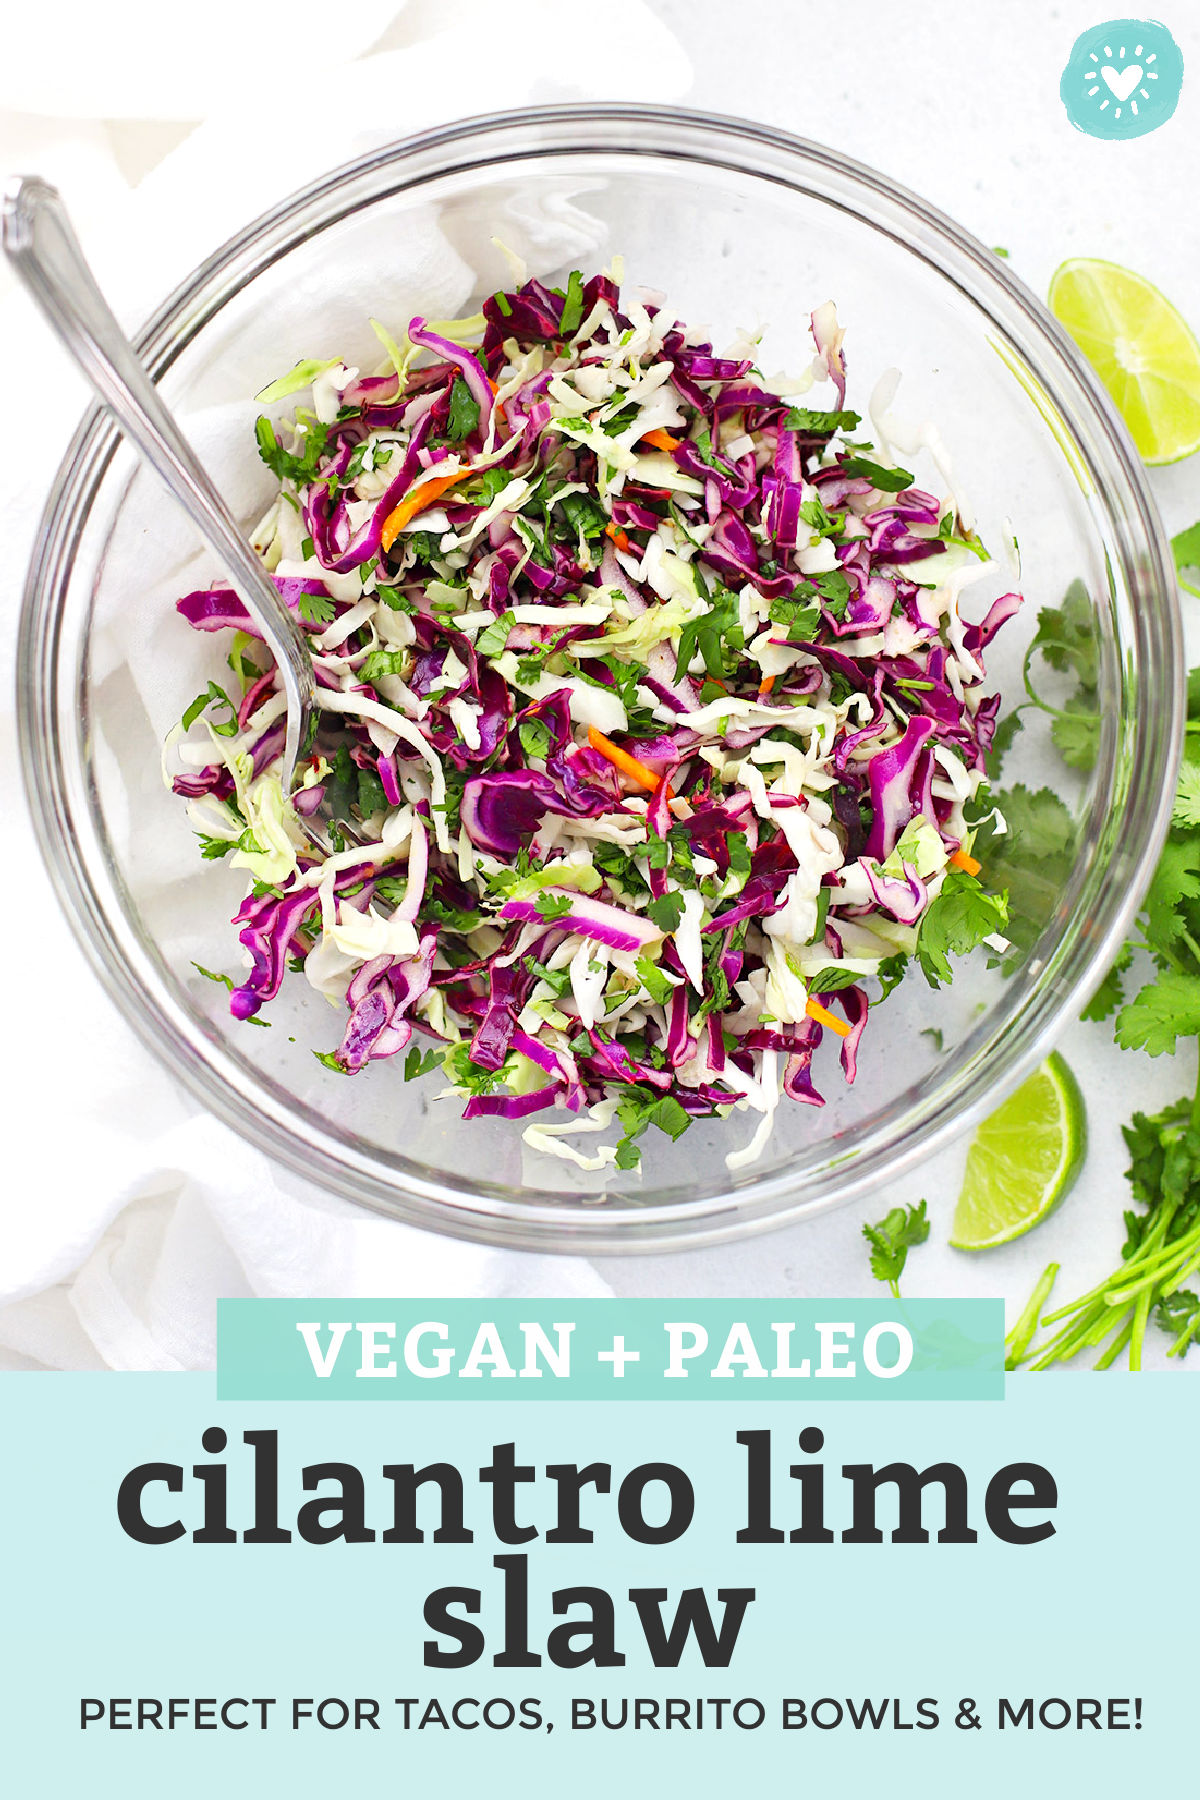 Cilantro Lime Slaw in a Glass Bowl with text overlay that reads "Vegan + Paleo Cilantro Lime Slaw. Perfect for tacos, burrito bowls, and more!"